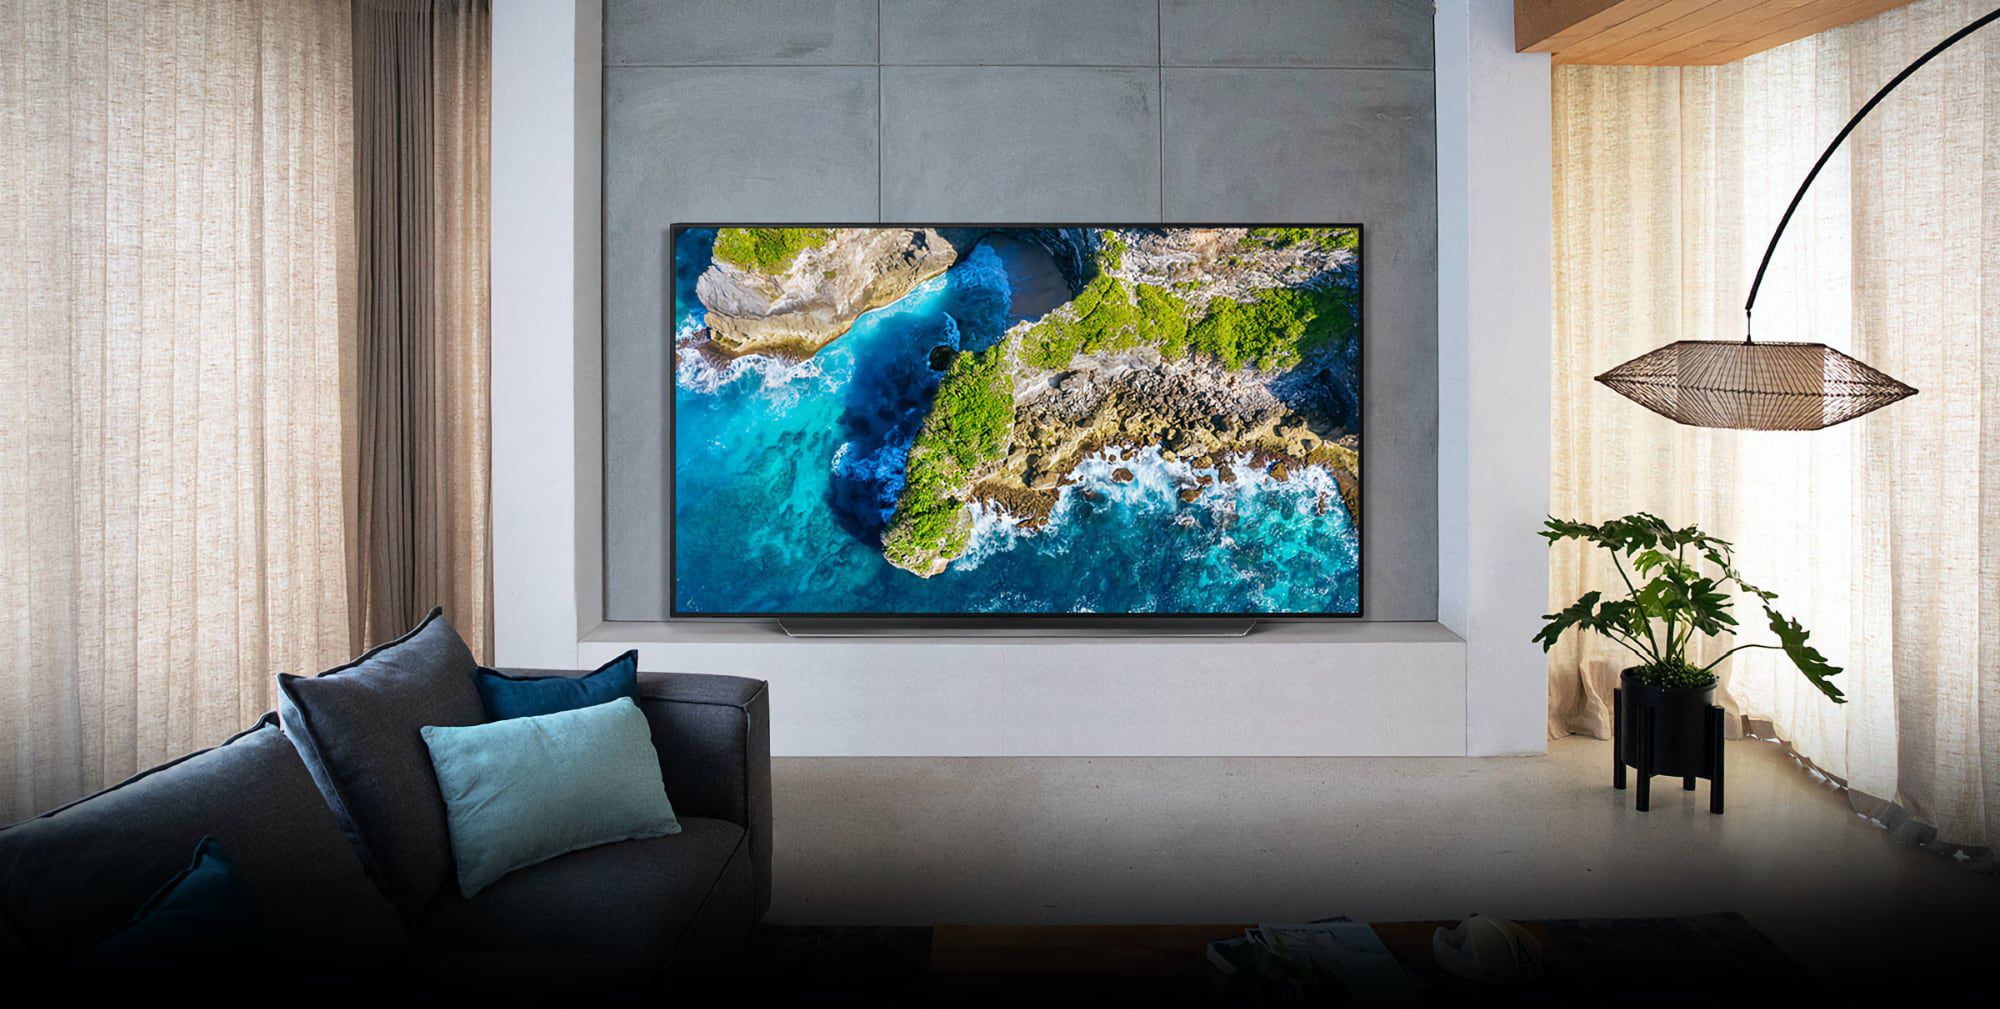 Do LG 4K OLED TVs have full-band HDMI 2.1? Not entirely